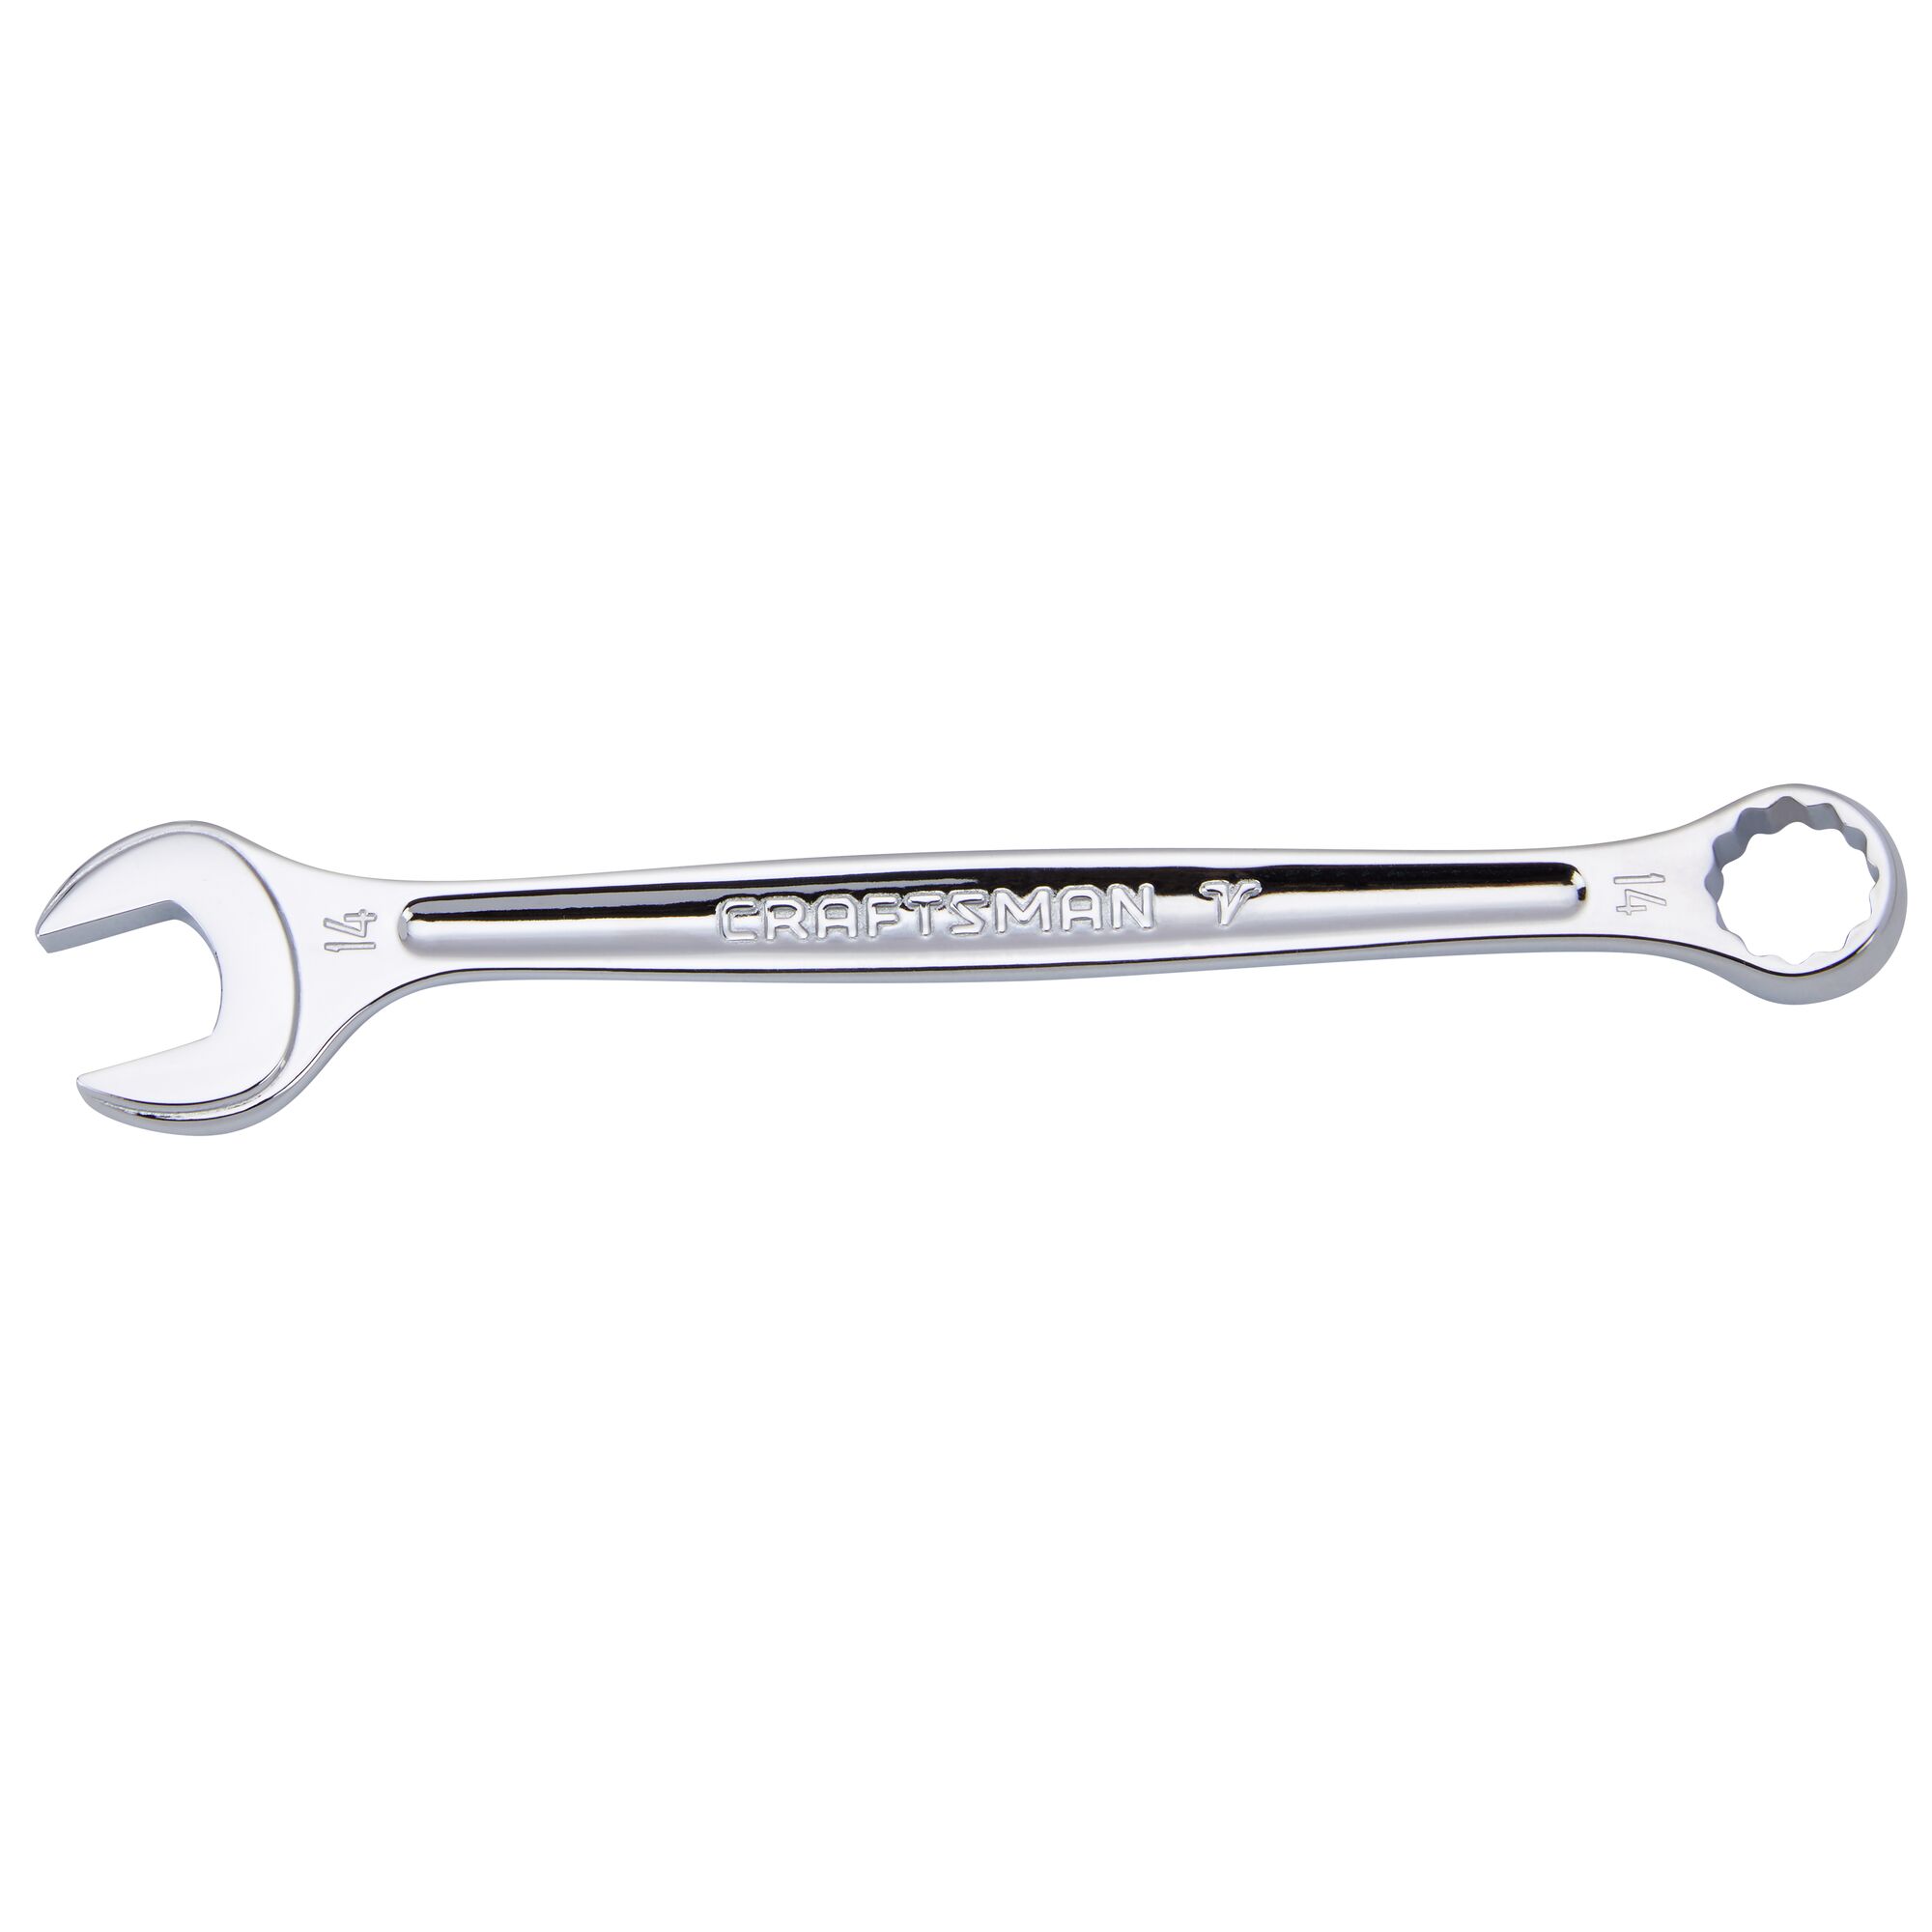 CRAFTSMAN V-SERIES Combo Wrench 14MM 